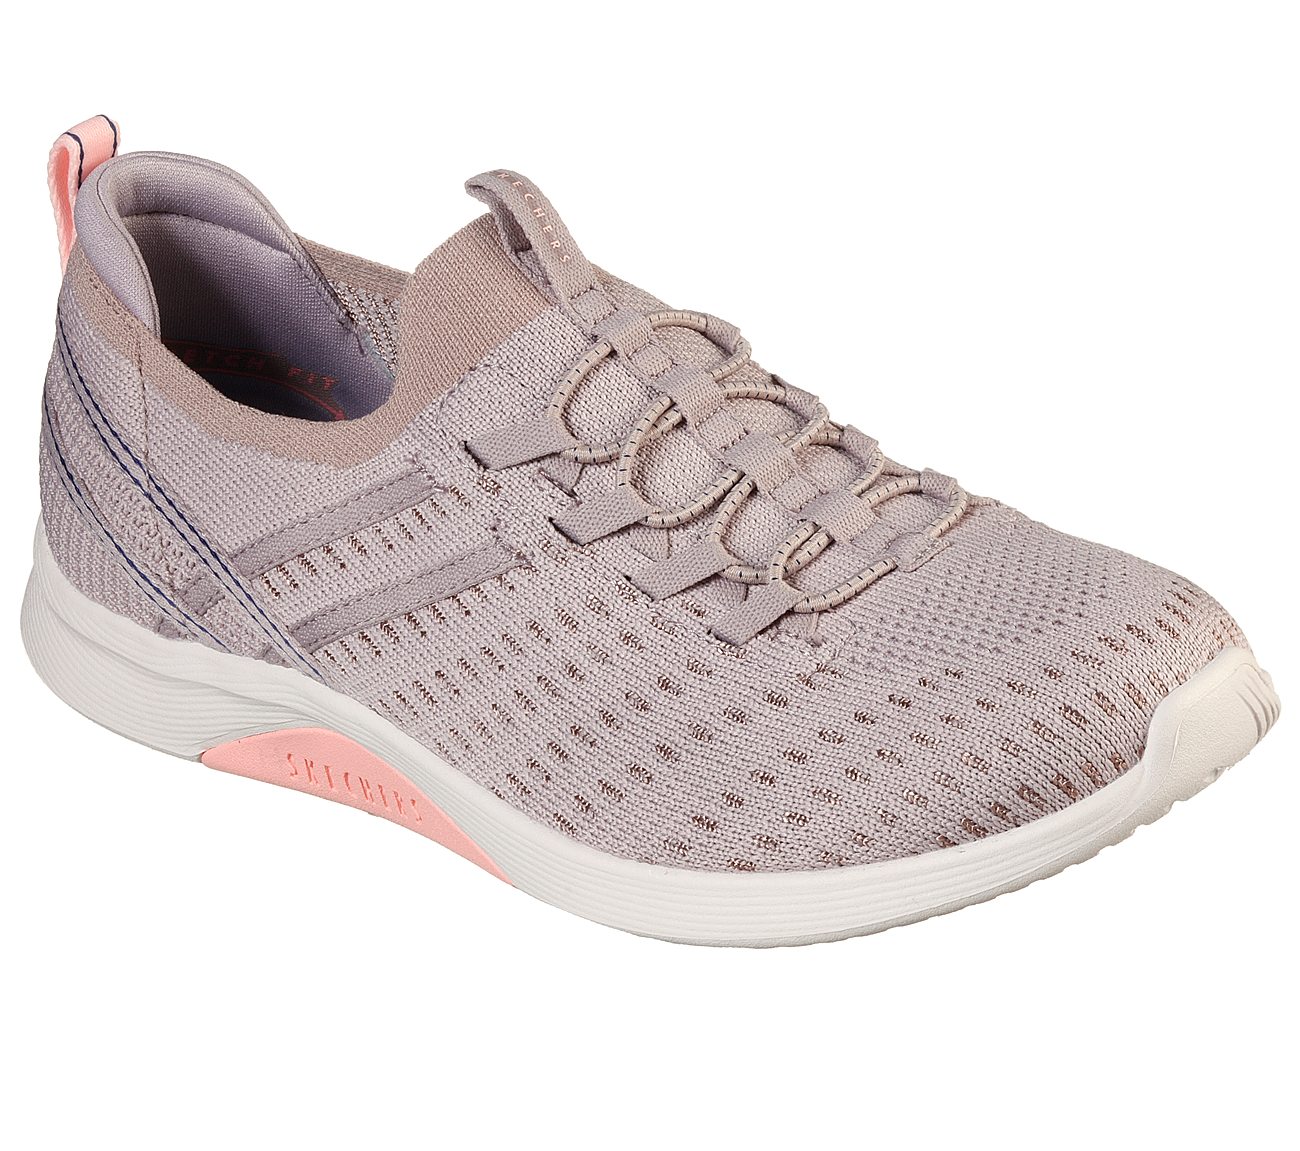 ESLA - EVERY MOVE, MMAUVE Footwear Lateral View